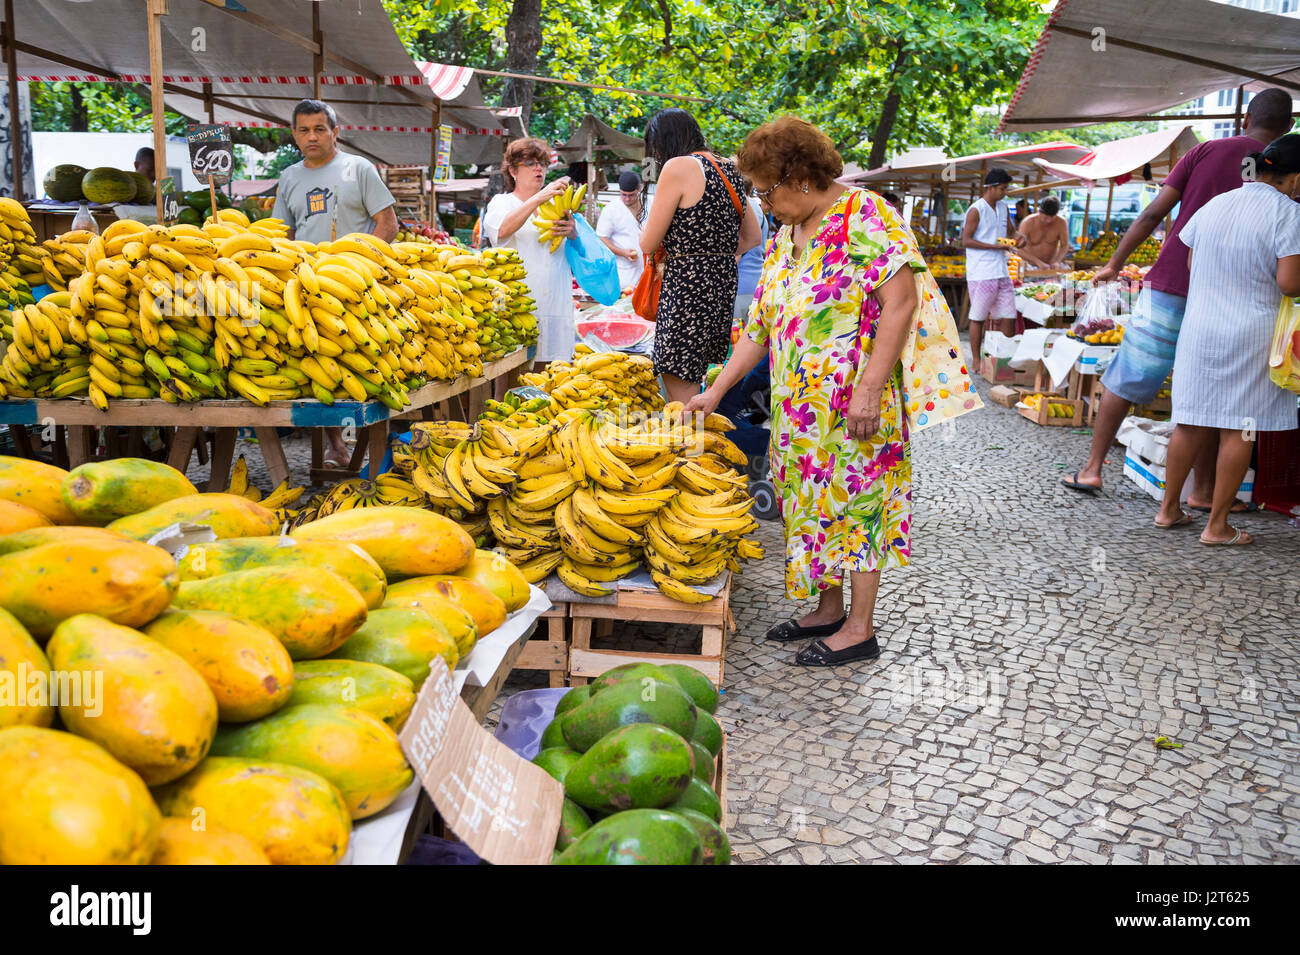 RIO DE JANEIRO - JANUARY 31, 2017: Brazilian customers browse the colorful stalls stacked with tropical fruit at the weekly farmers market in Ipanema. Stock Photo